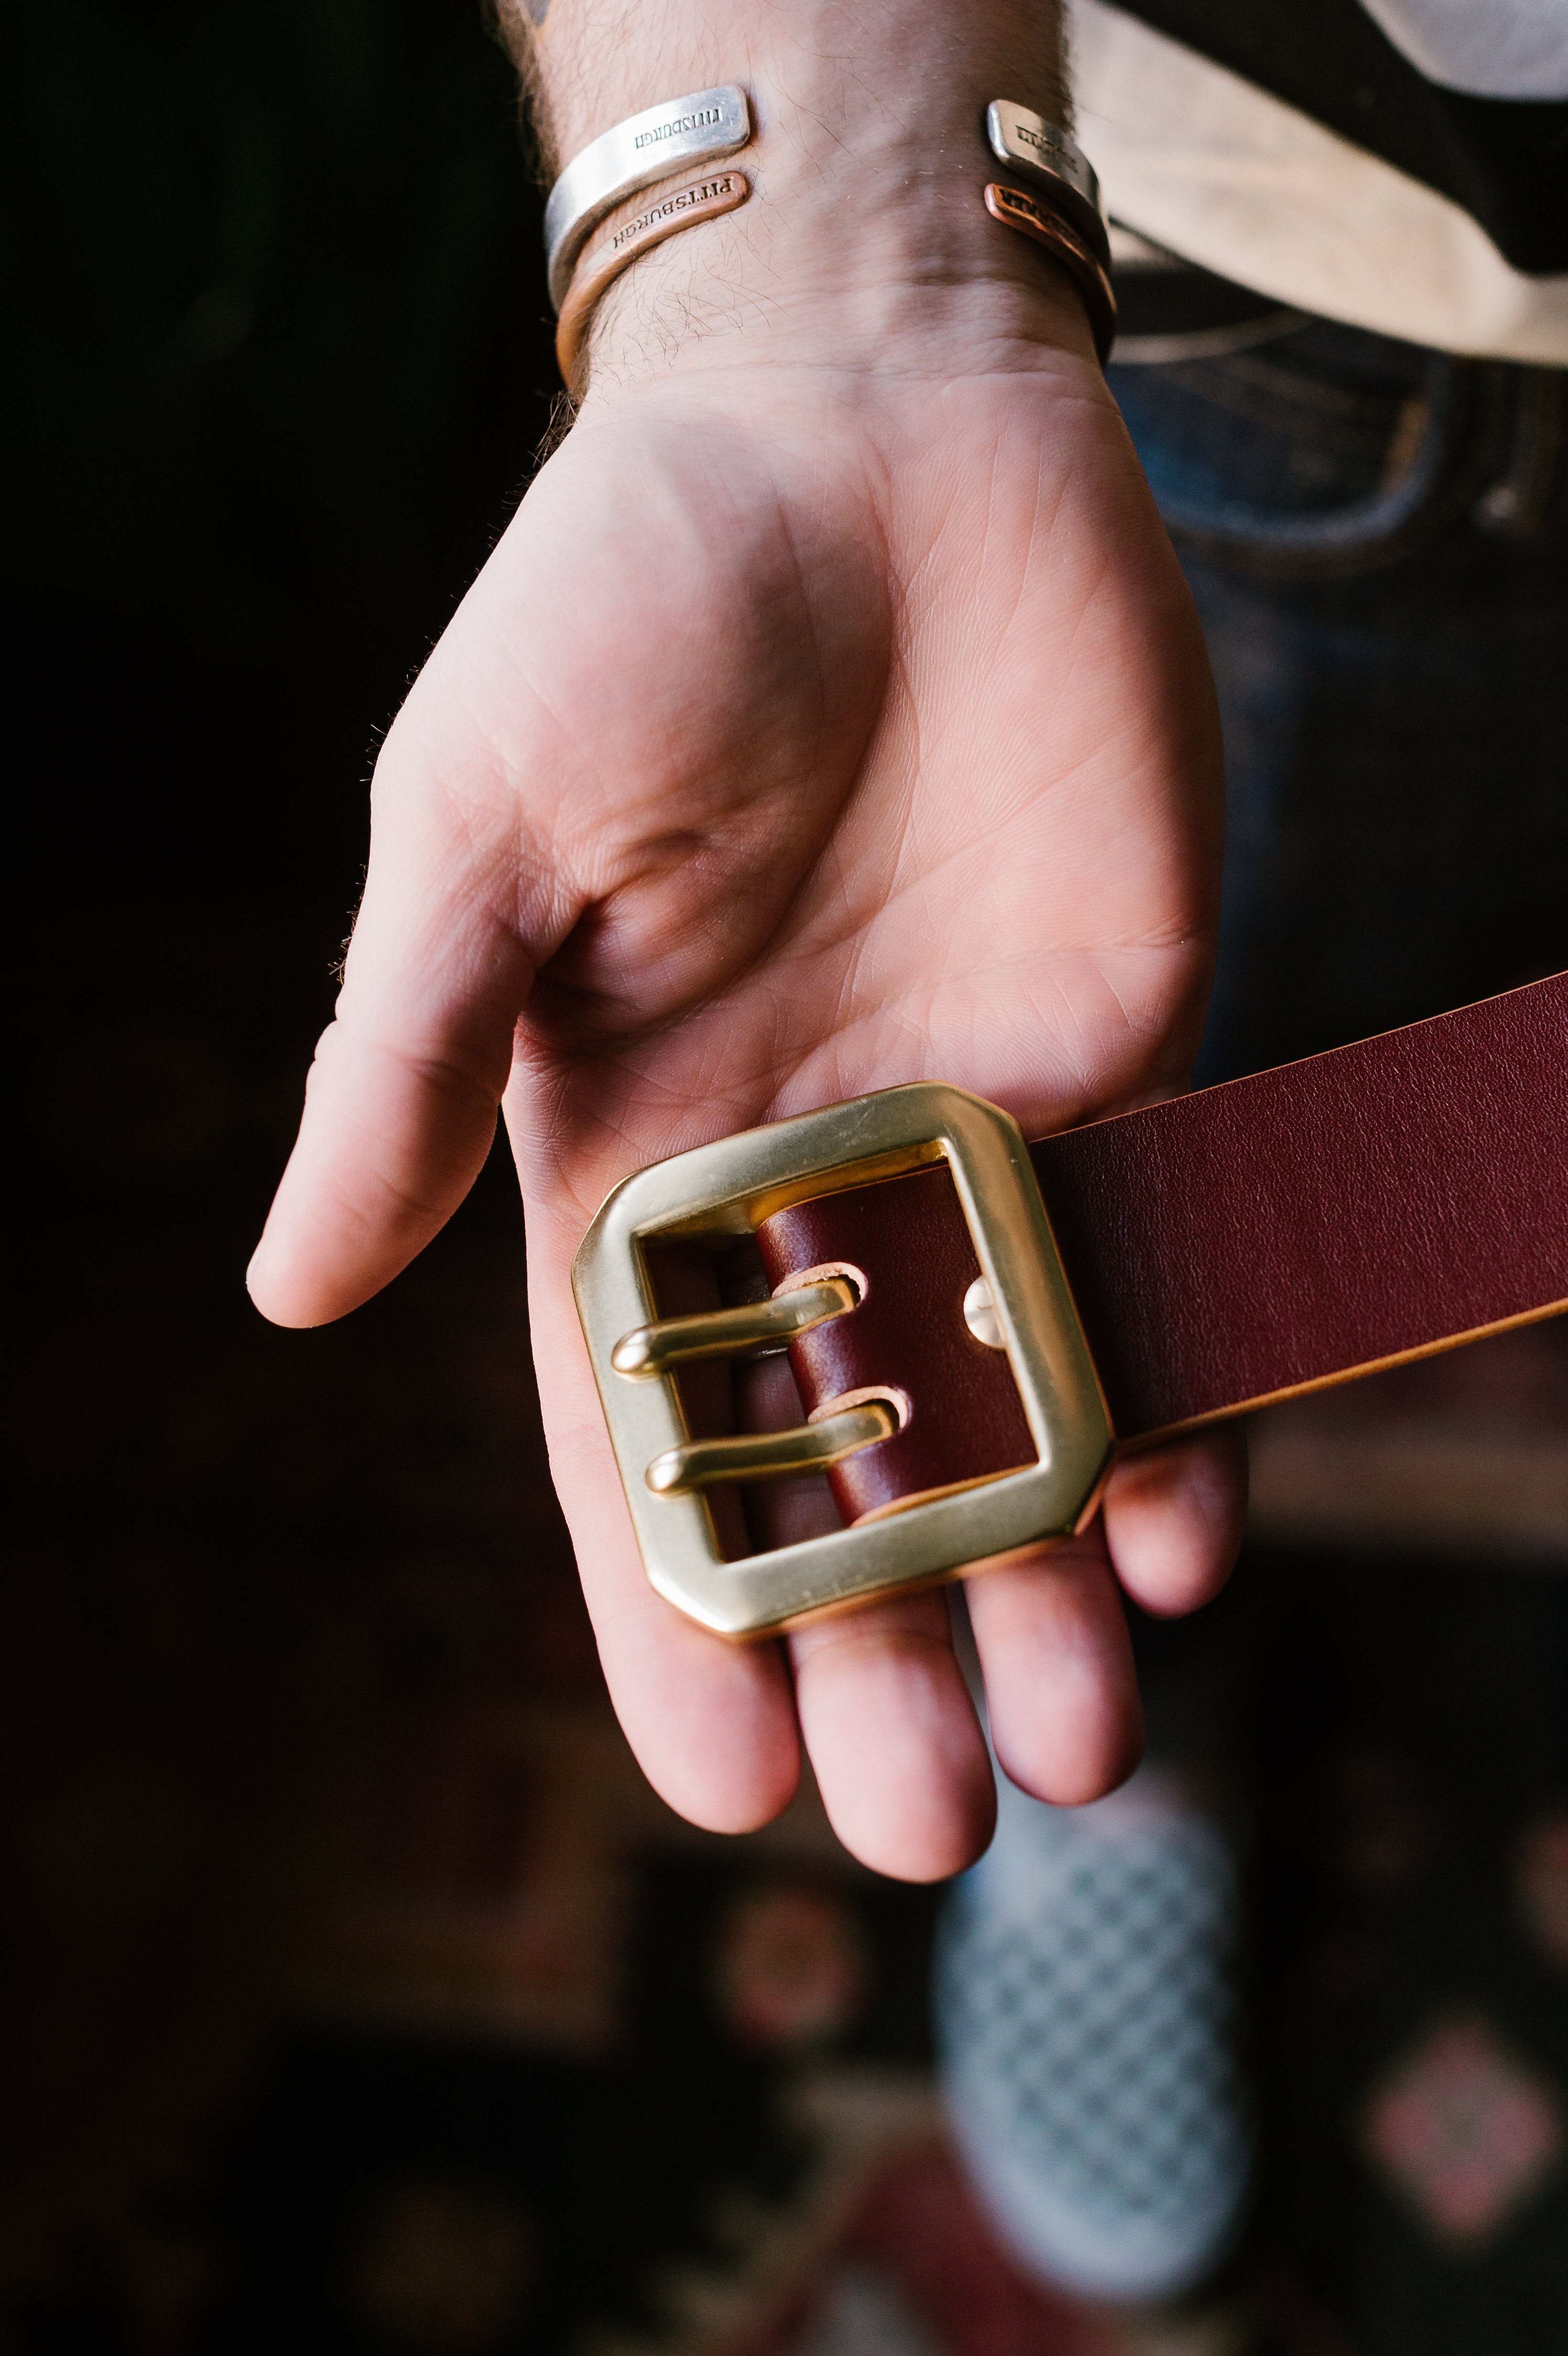 Double Prong Brass Garrison Buckle Leather Belt - Hand-Dyed Brown